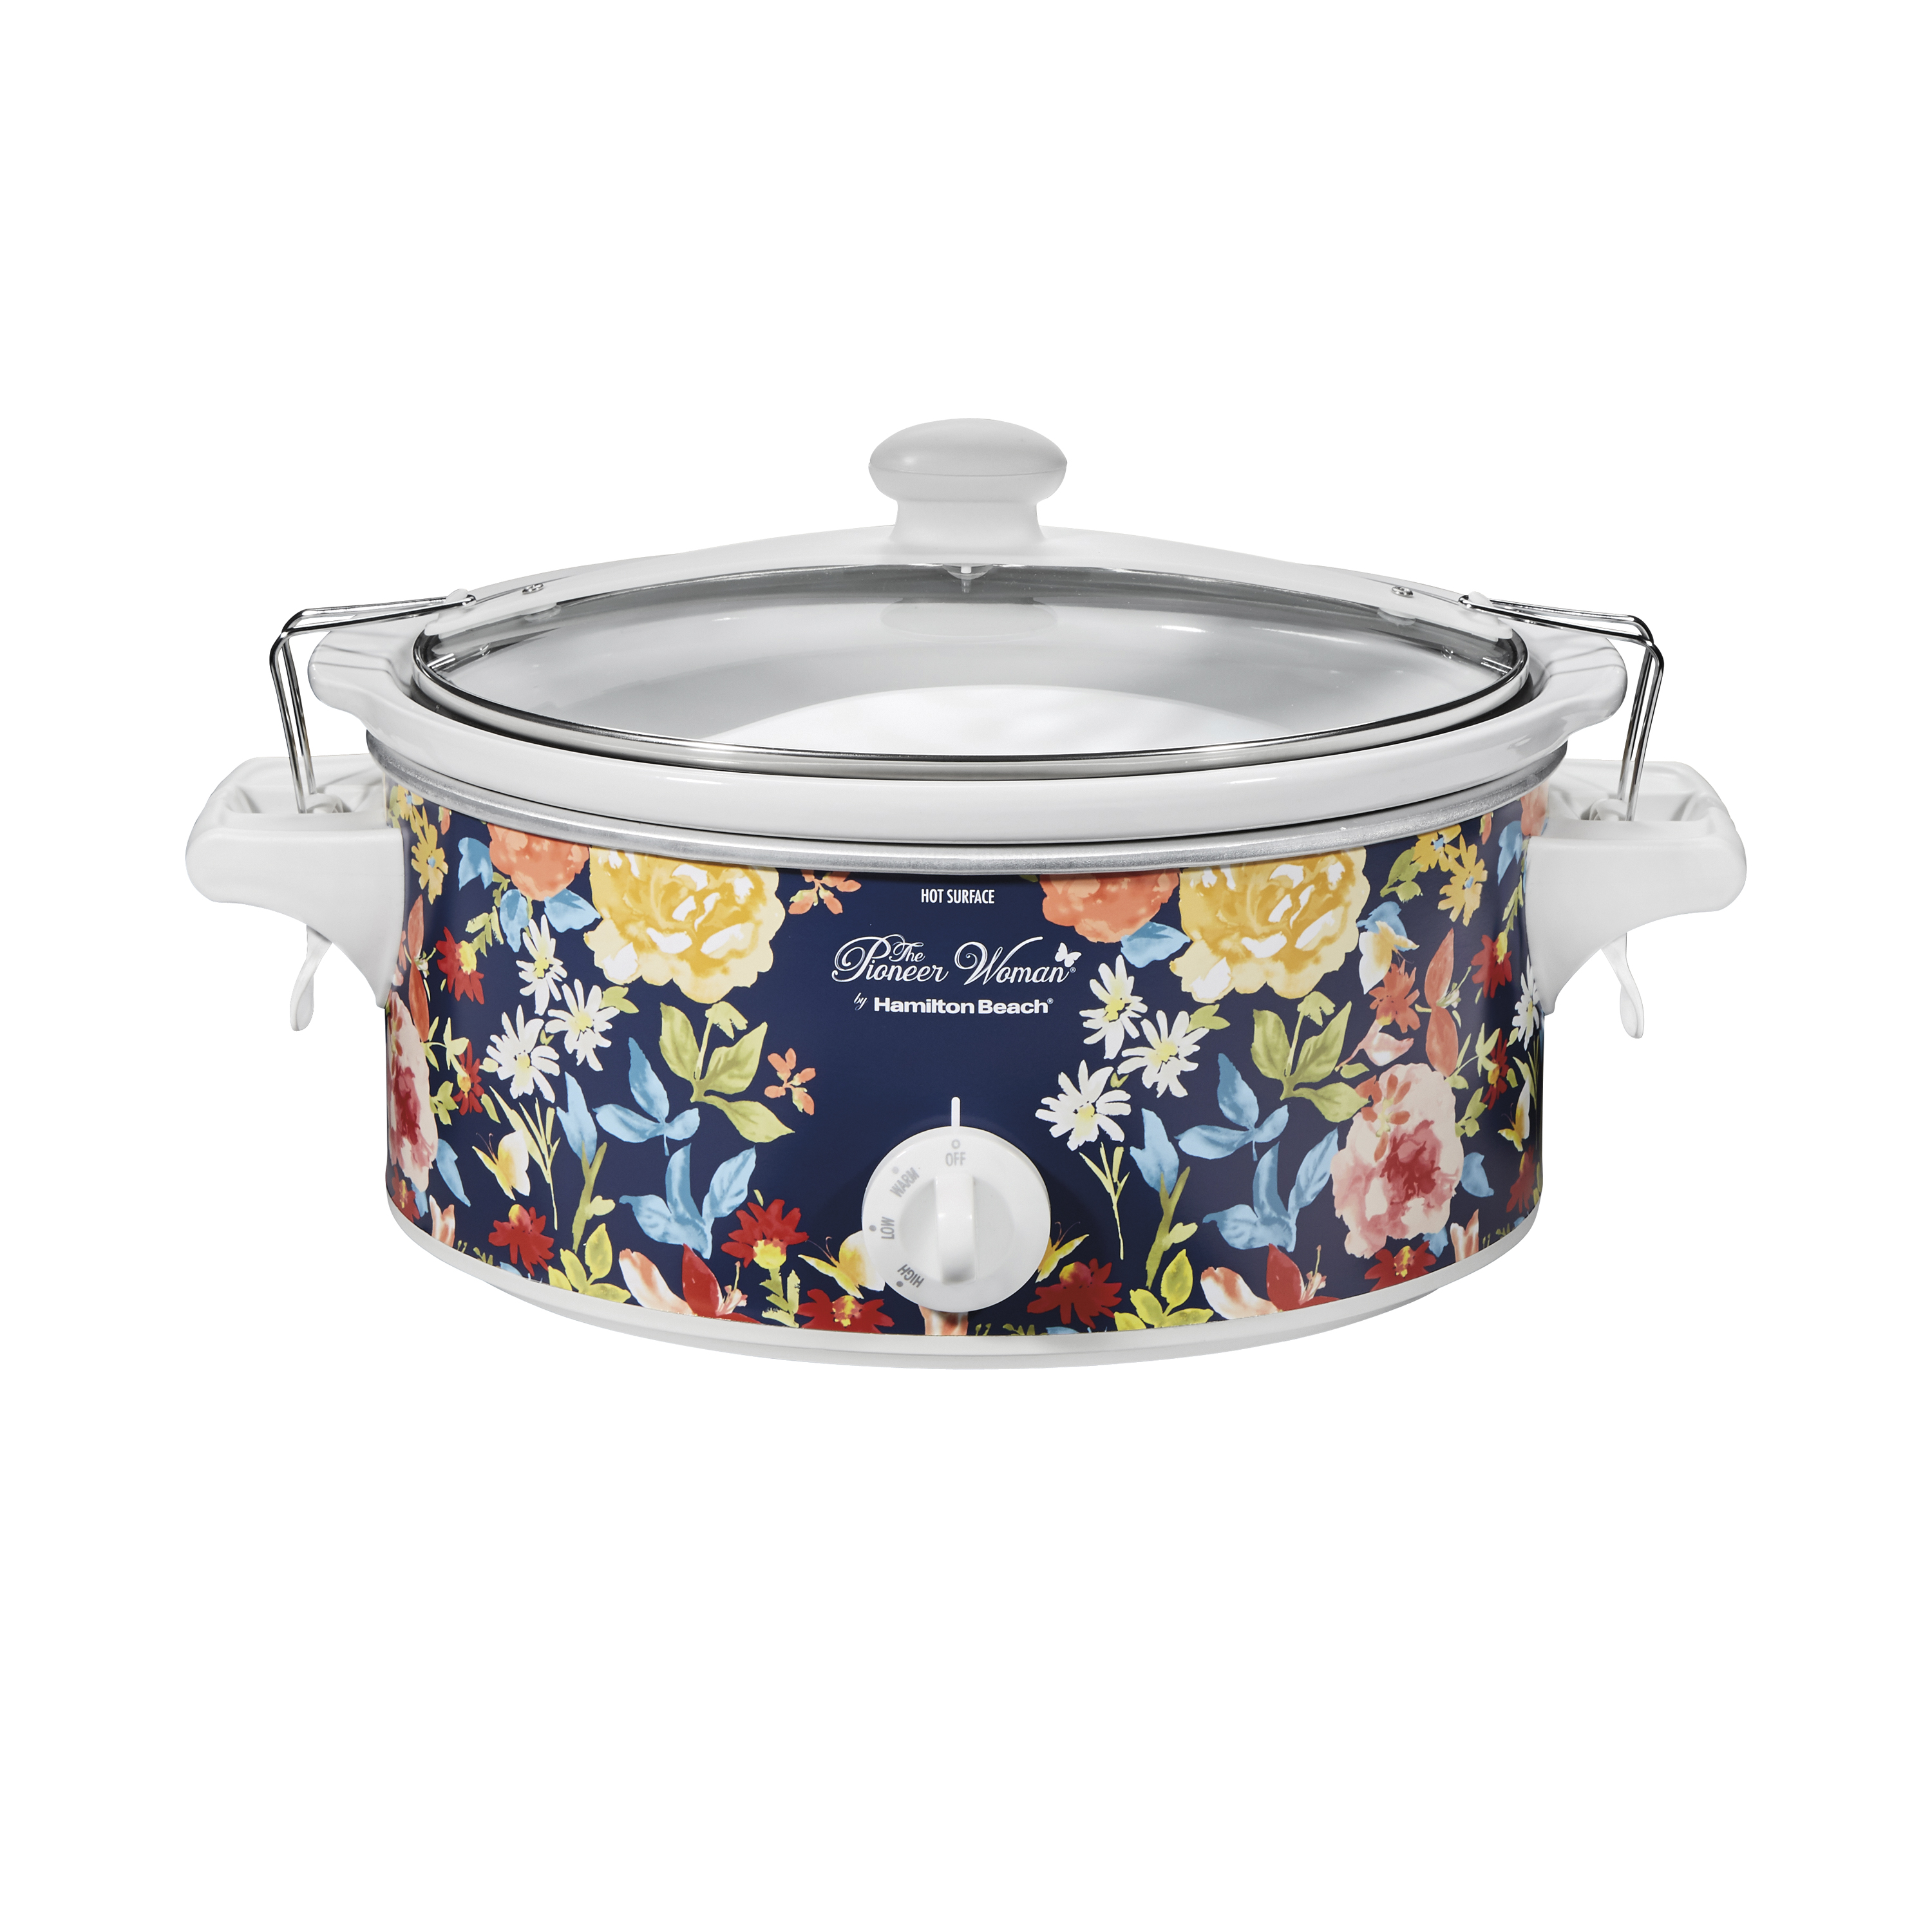 Pioneer Woman 6 Quart Portable Slow Cooker Fiona Floral | Model# 33066 By Hamilton Beach - image 1 of 12